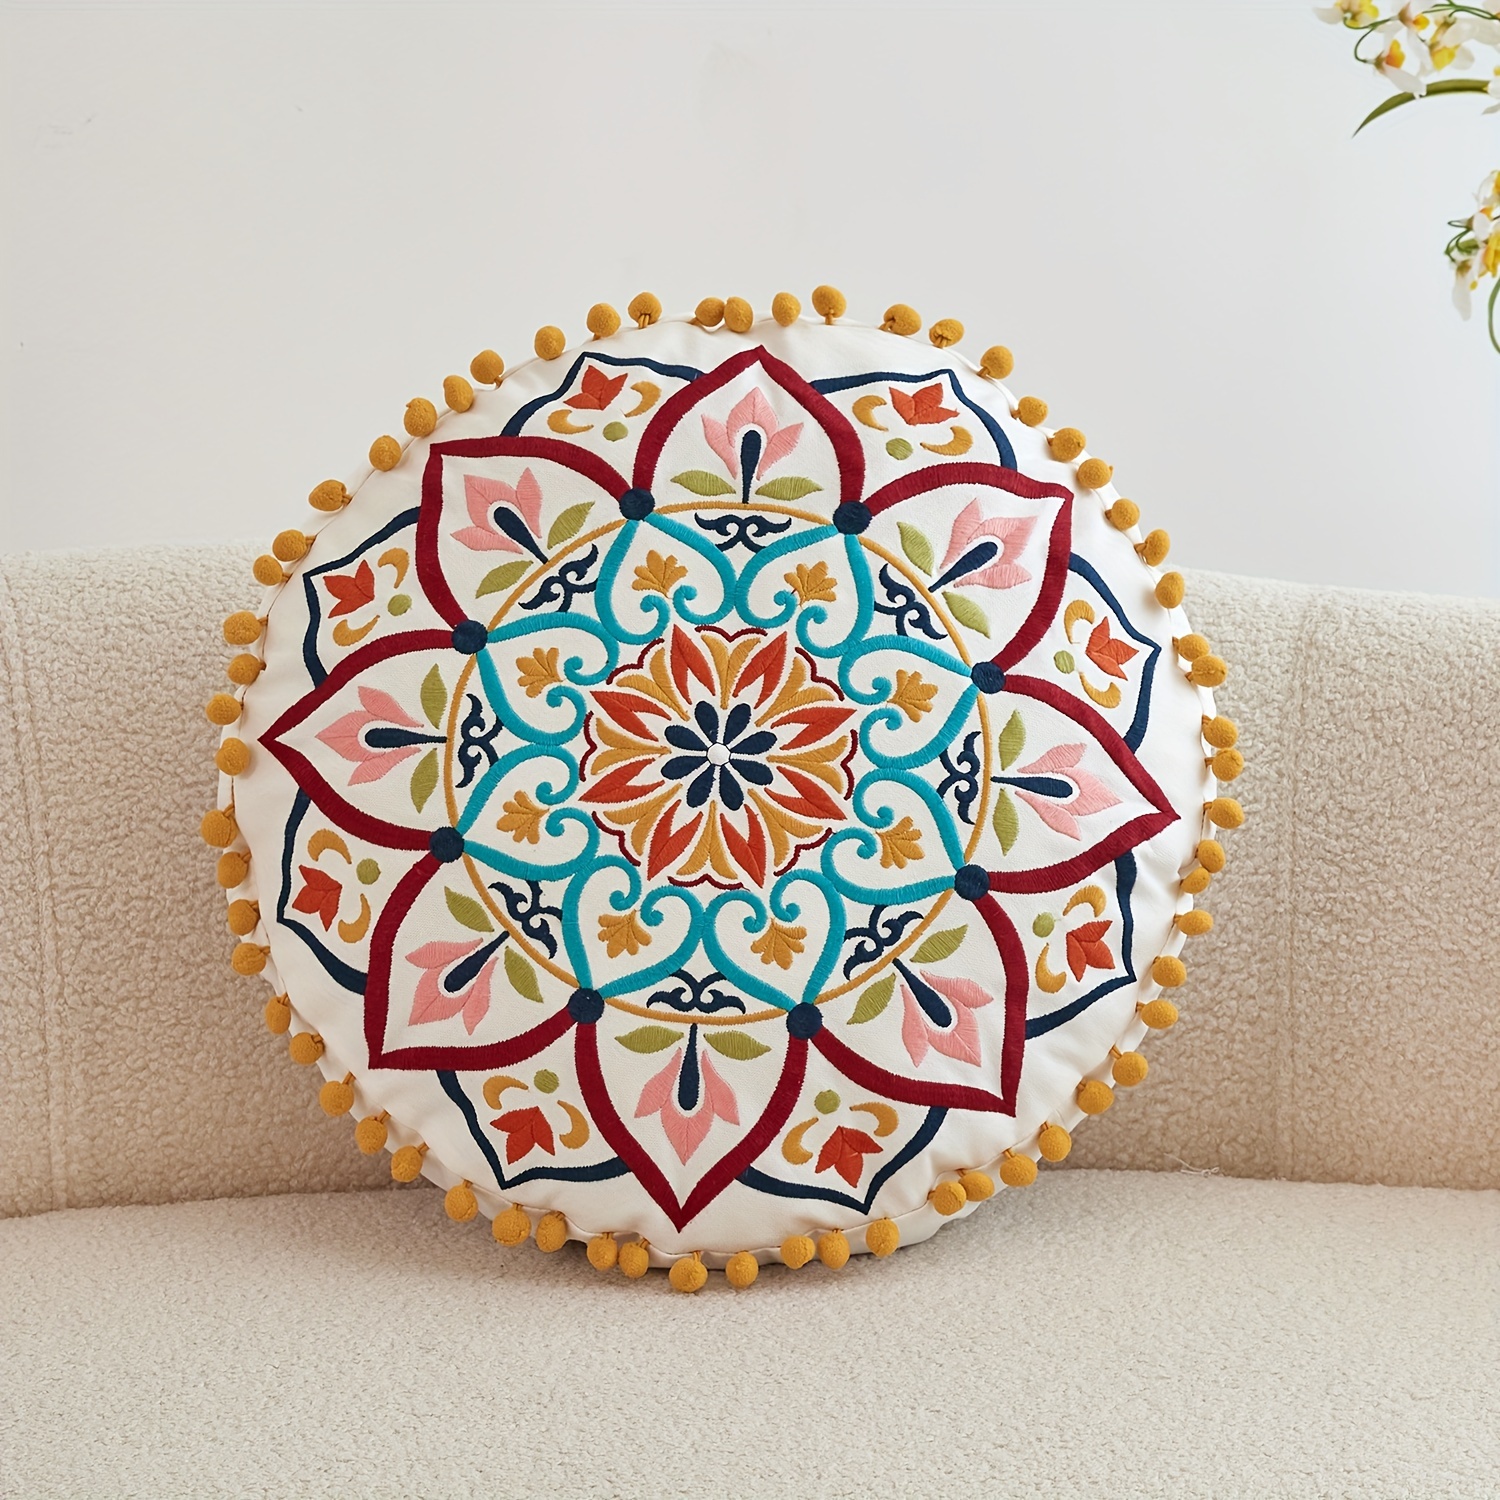 

Embroidered Round Throw Pillow Cover 1pc, Traditional-style Mandala Pattern With Zipper Closure, 100% Cotton Woven Decorative Cushion Case For Various Room Types, Machine Washable